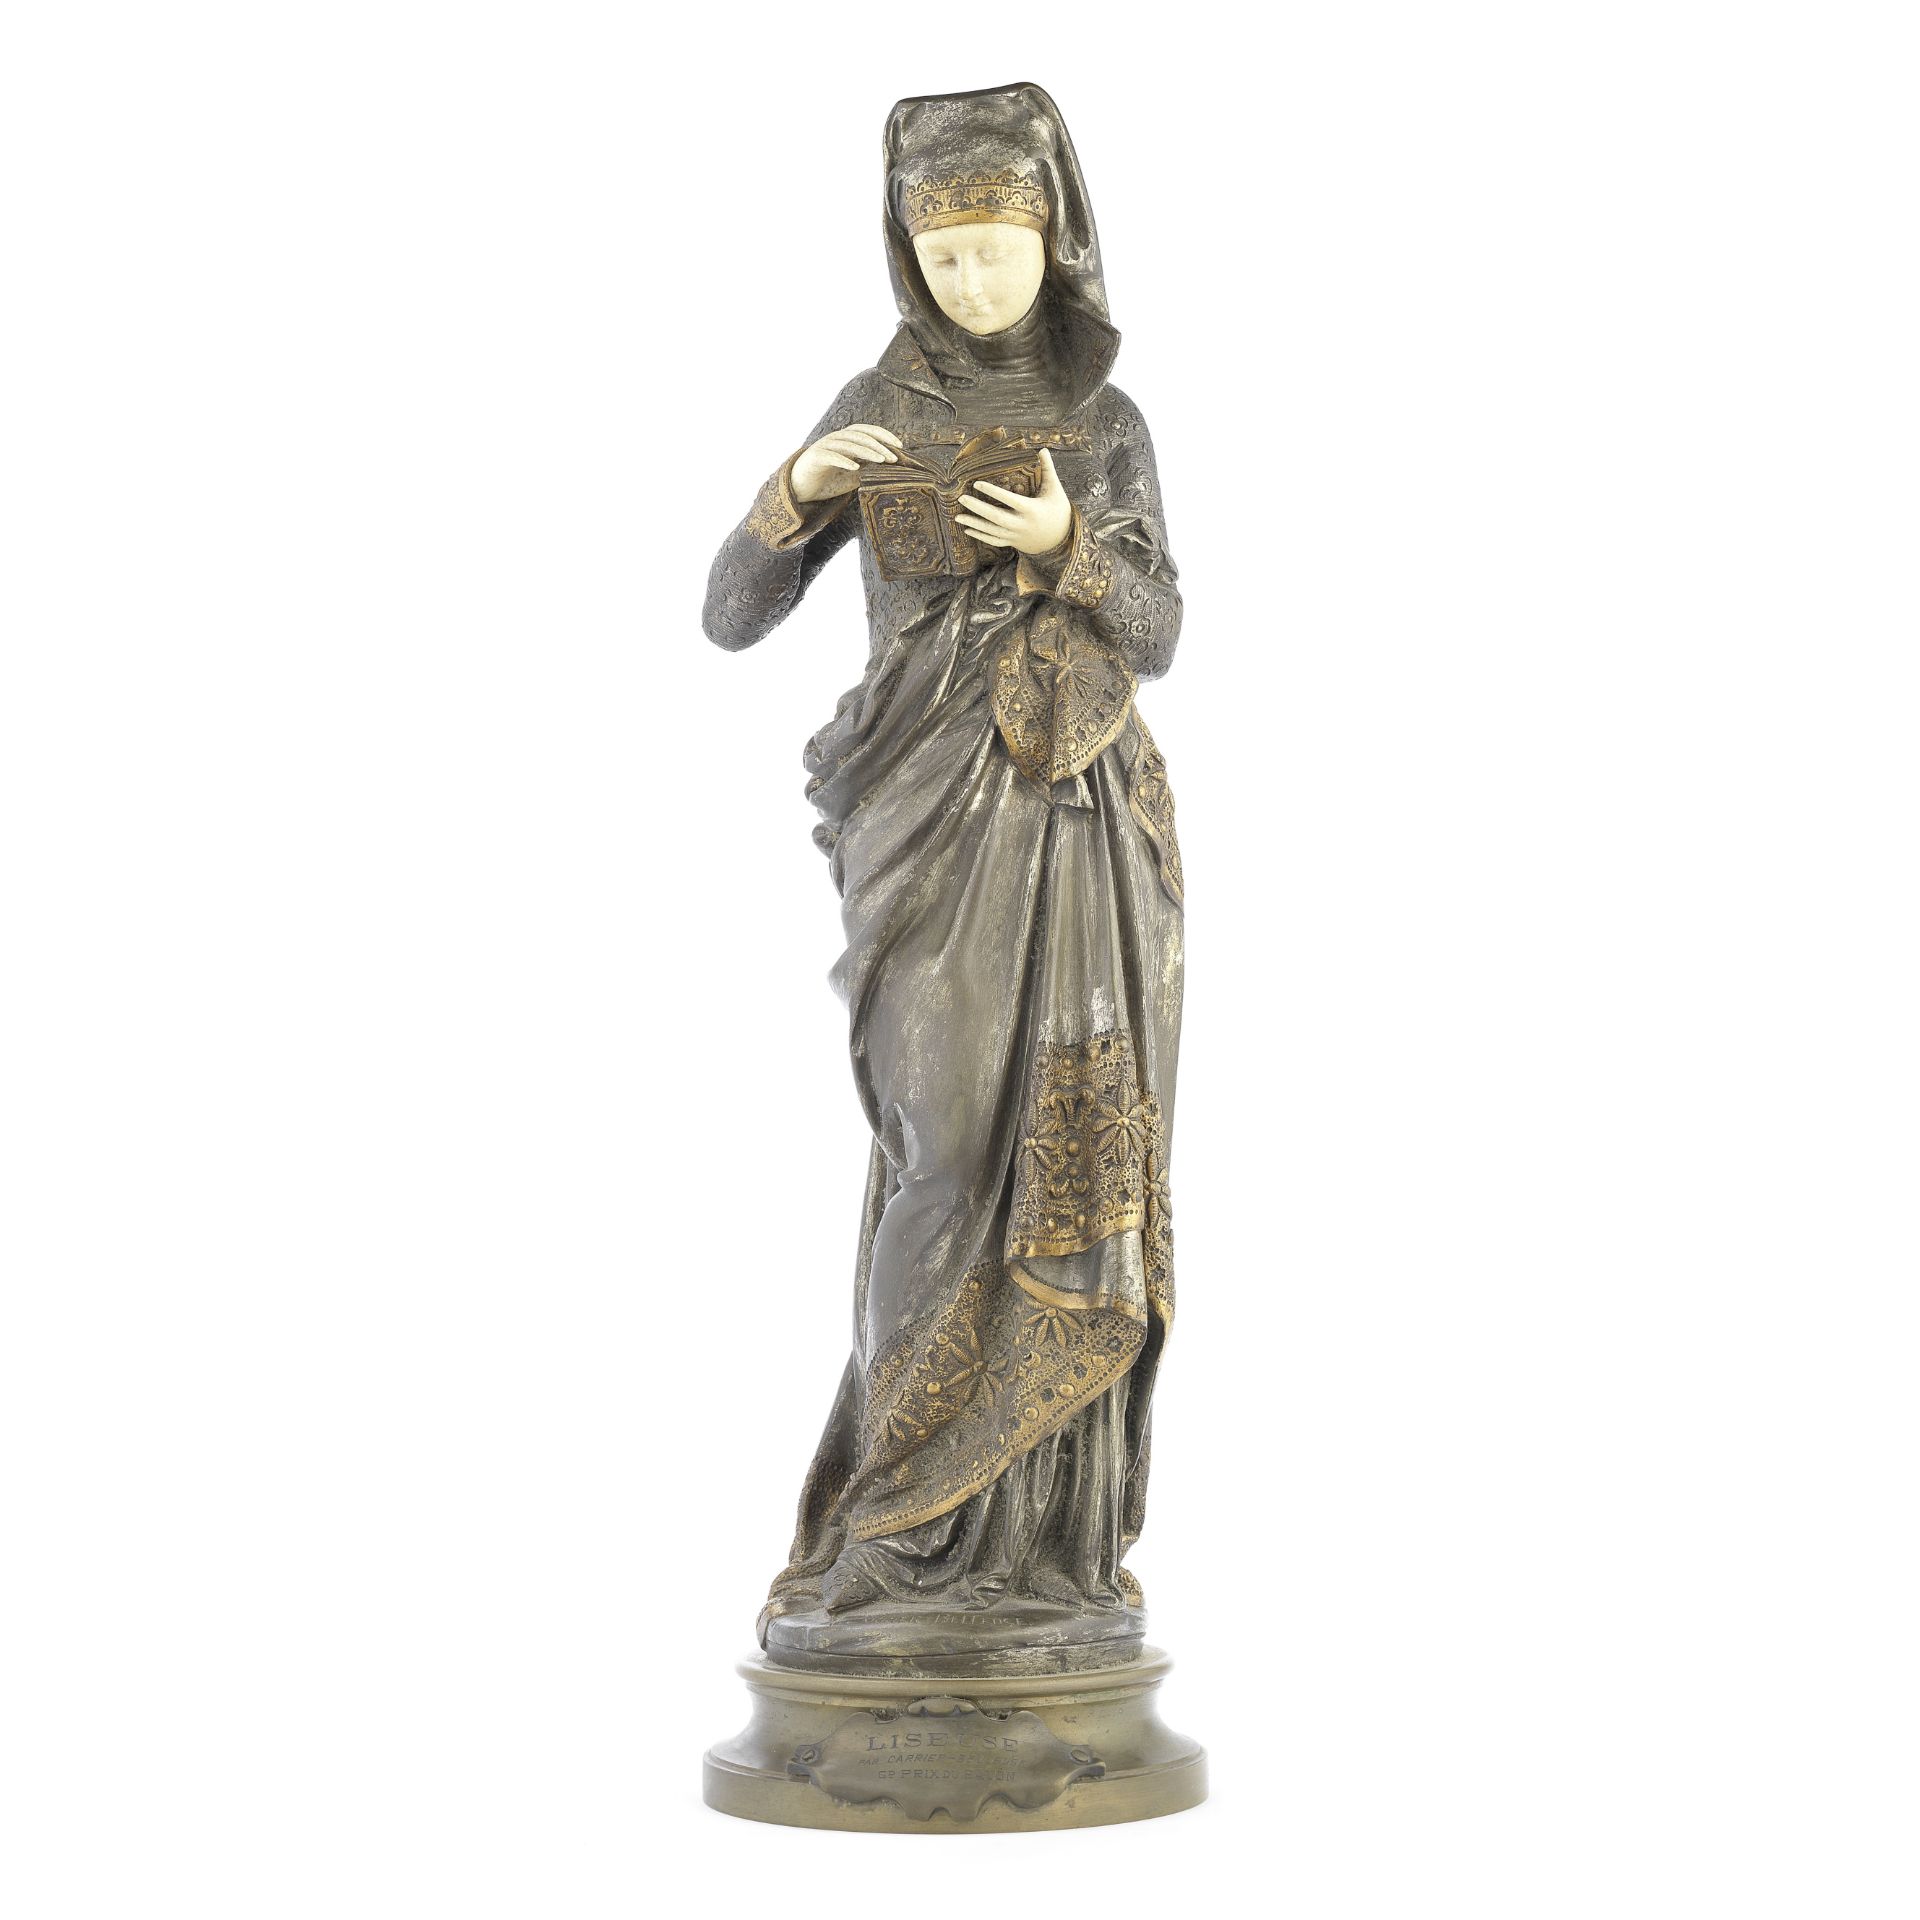 After Albert Ernest Carrier-Belleuse (French, 1824-1887): A late 19th / early 20th century patina...